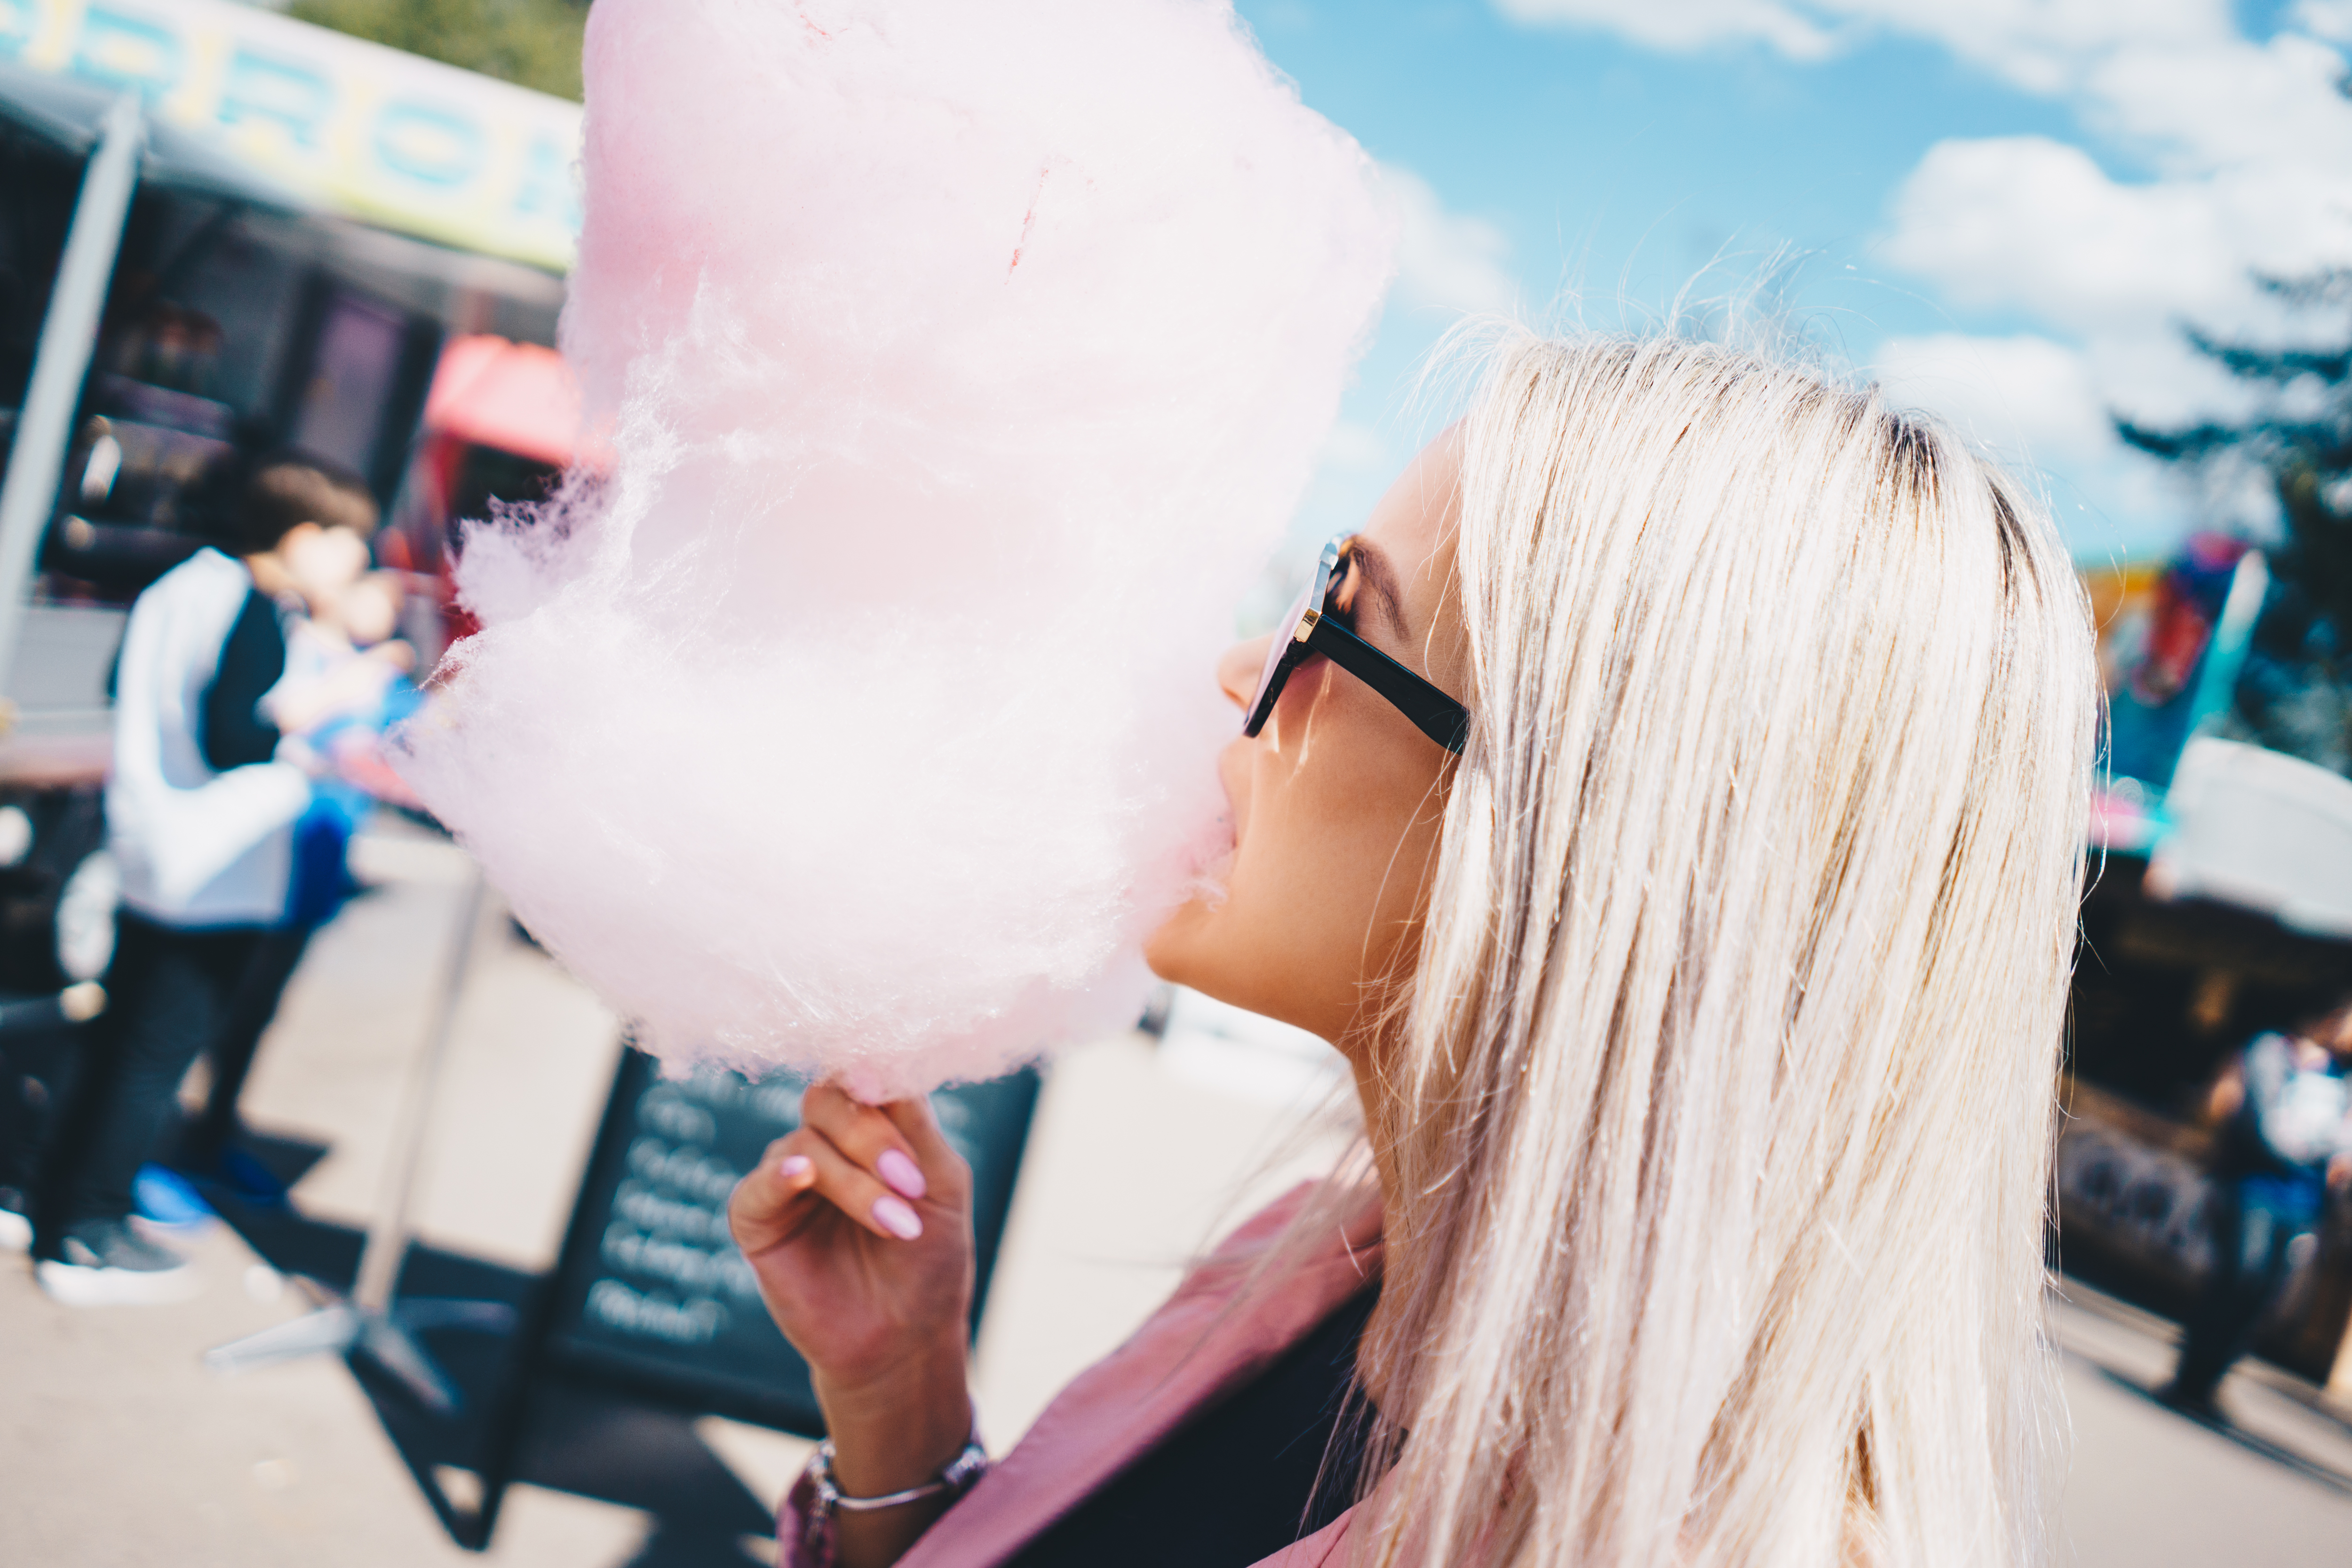 cotton candy photography tumblr